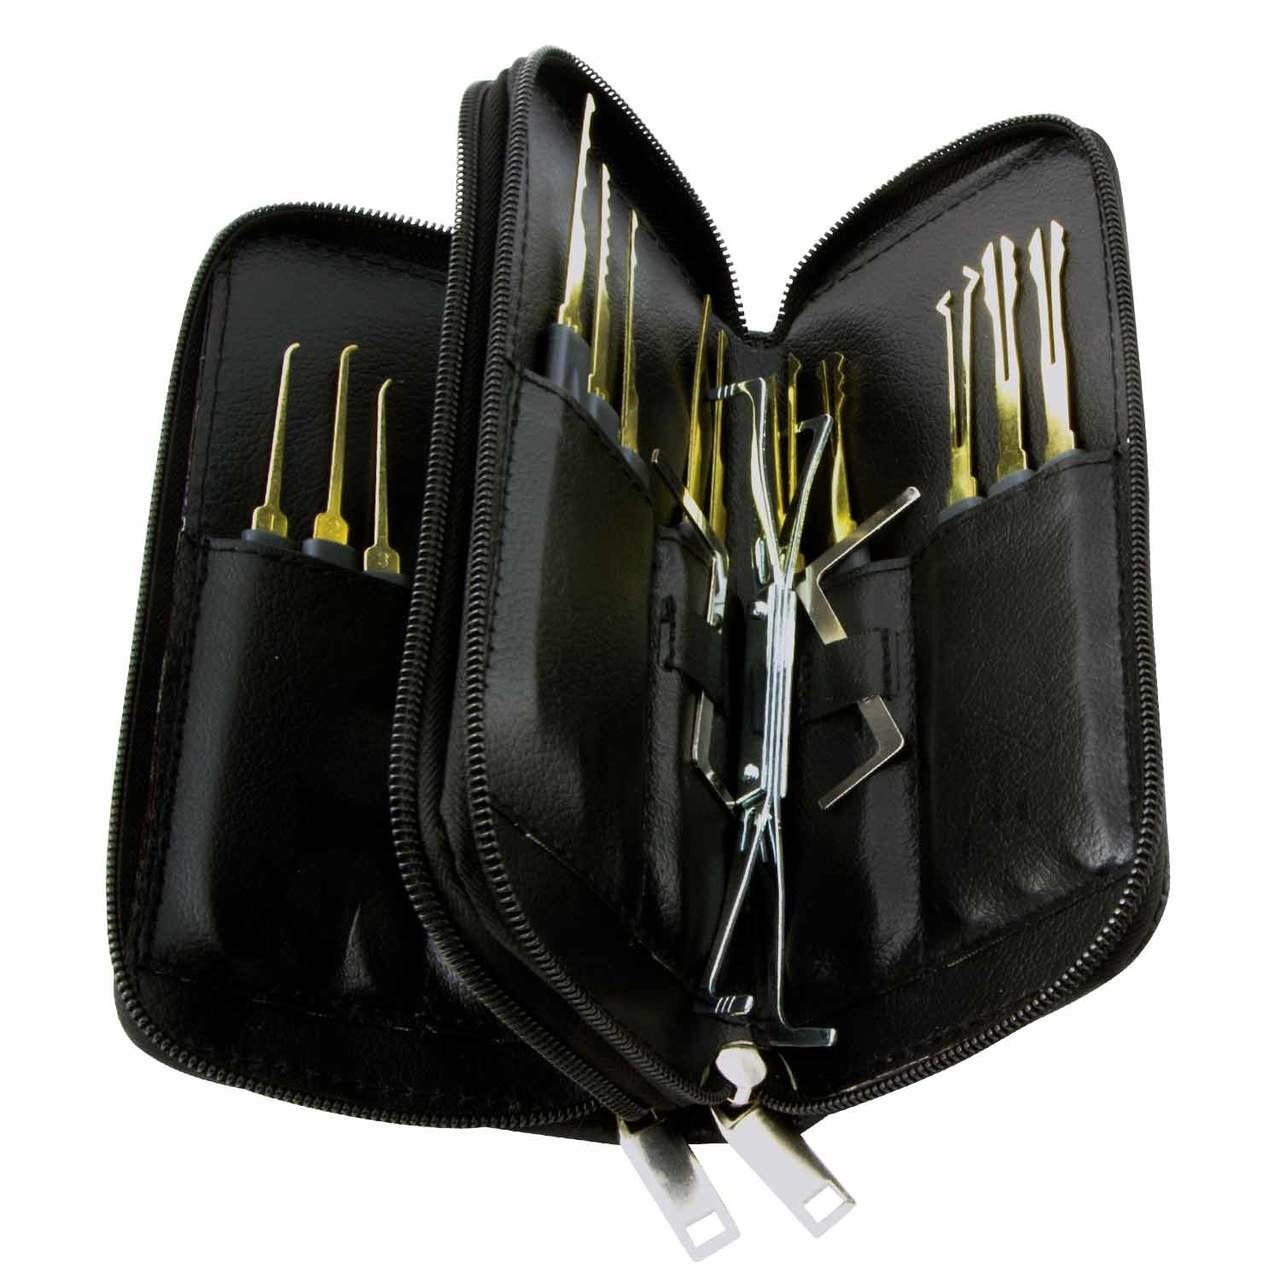 Unlock Everything: Full Practice Lock Picking Kit [Visual Aid included]